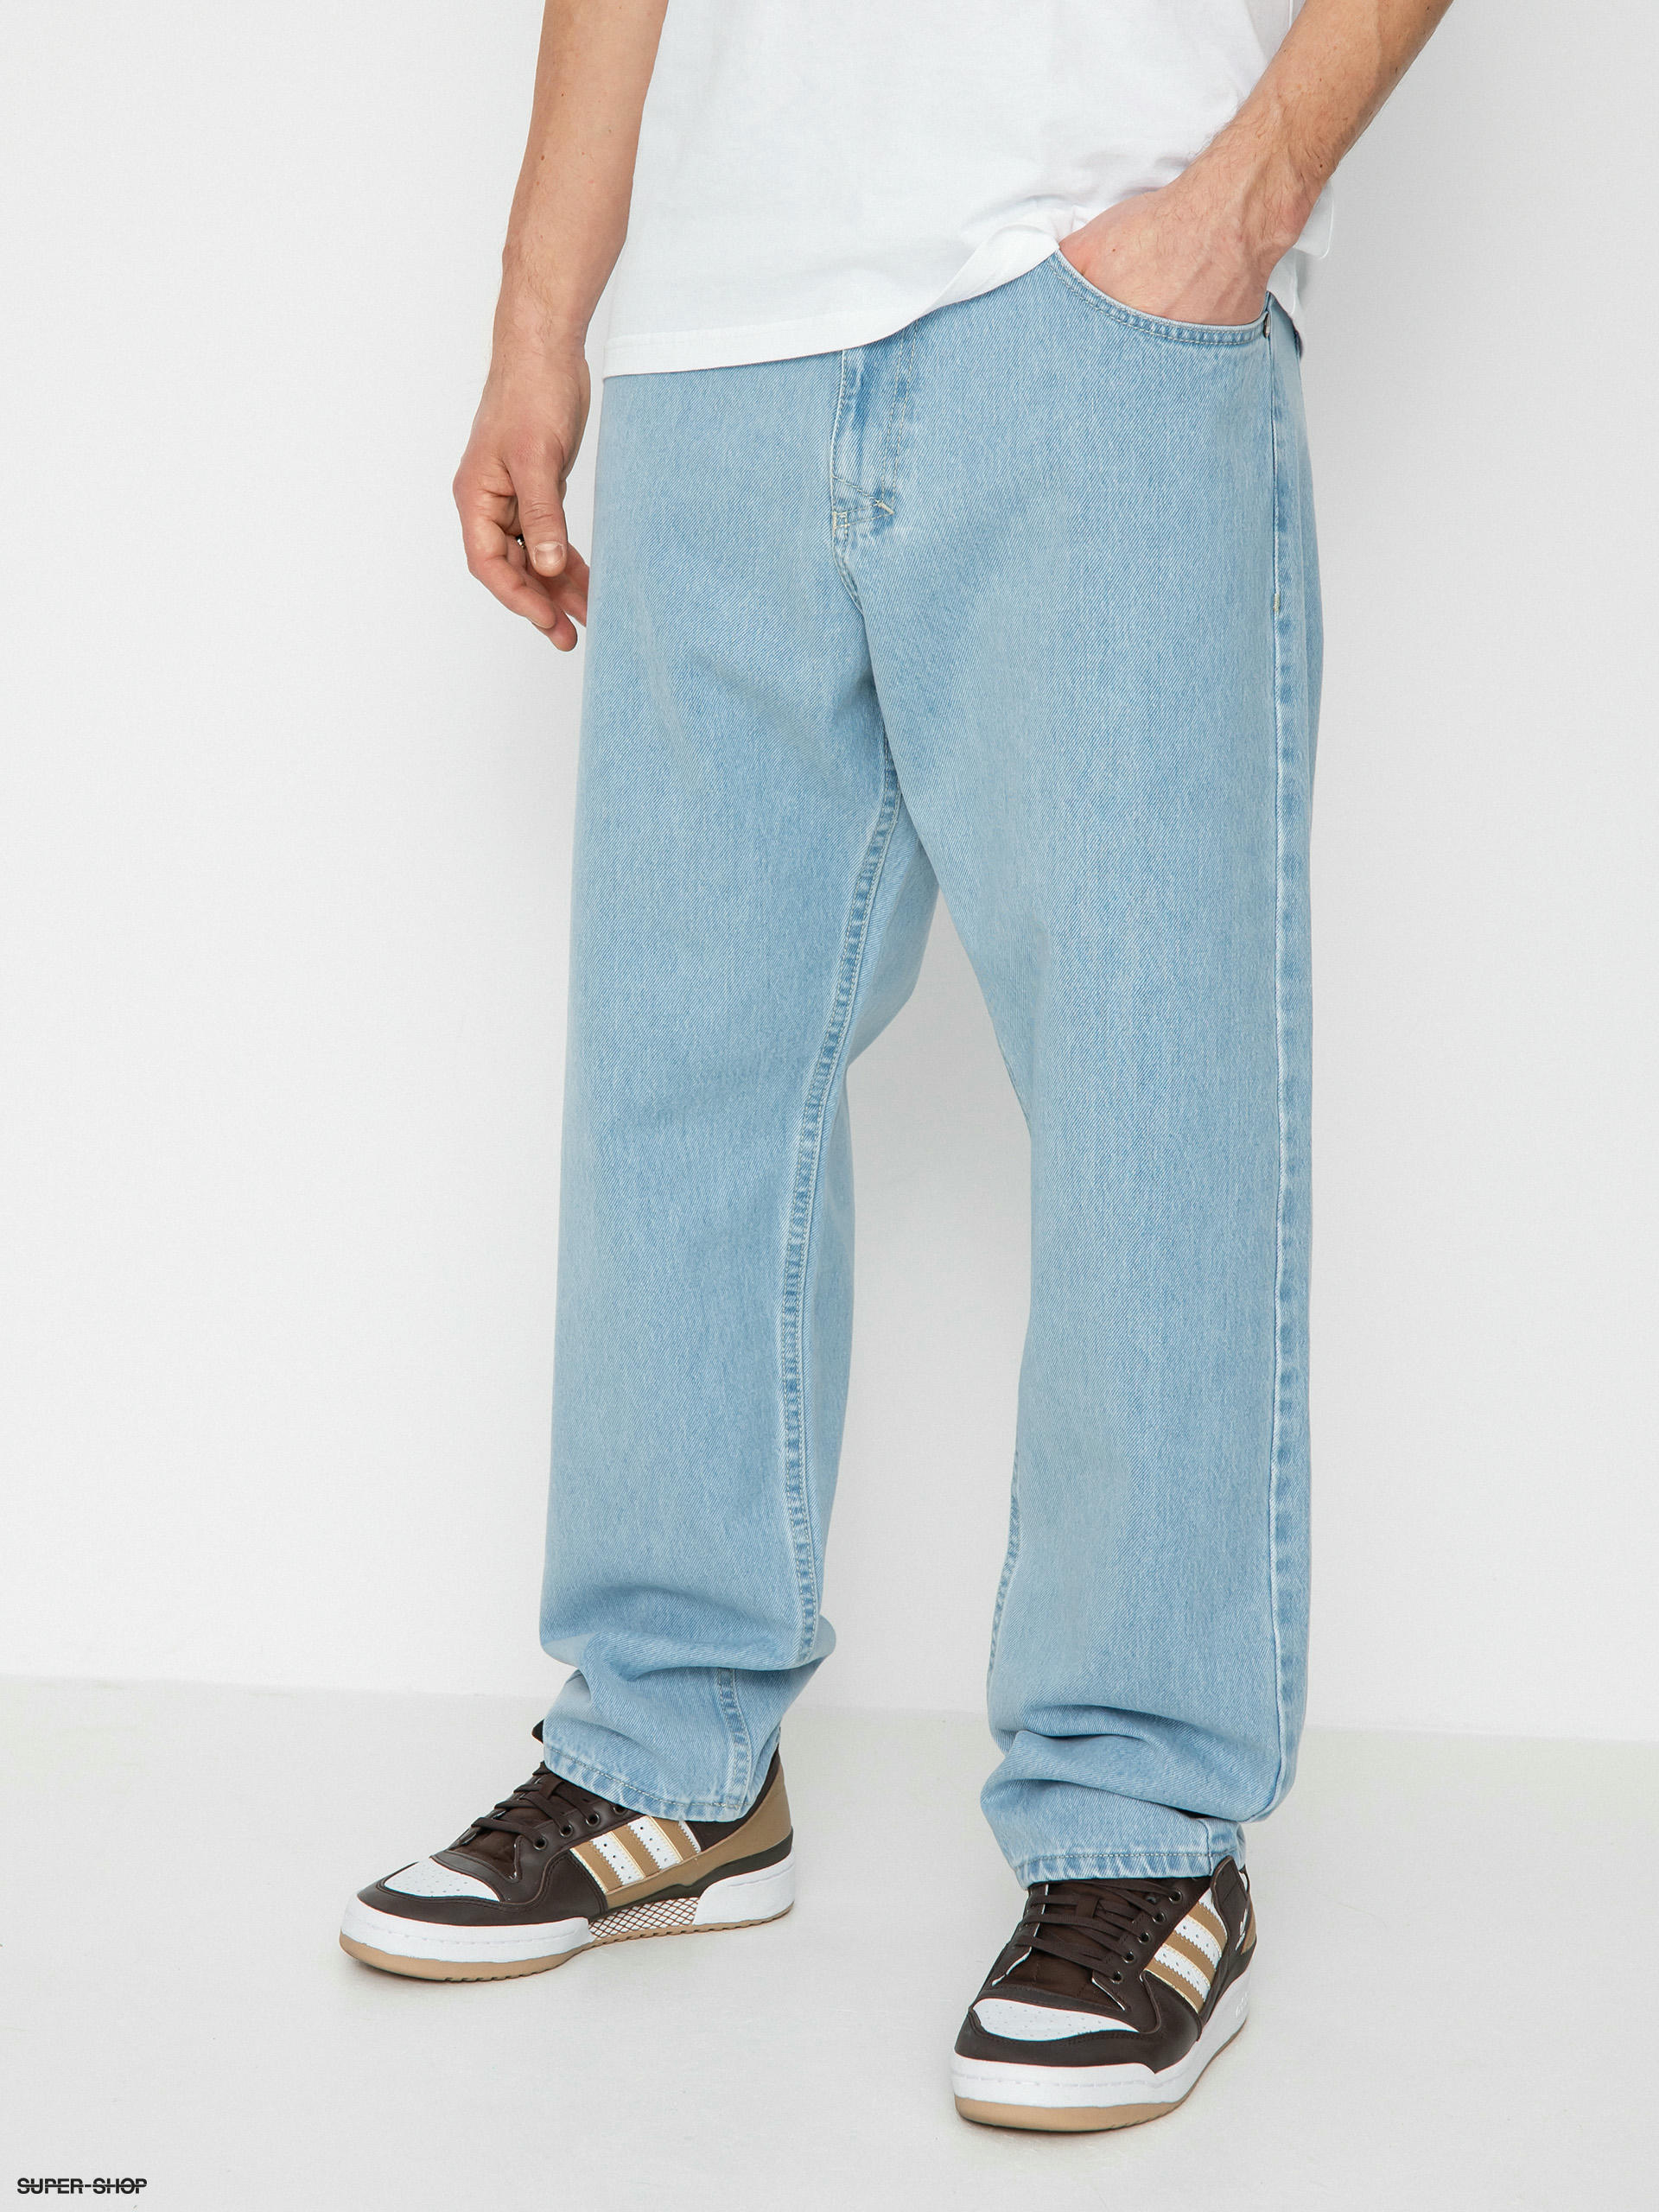 How To Buy Baggy Jeans That Fit Well  LBB